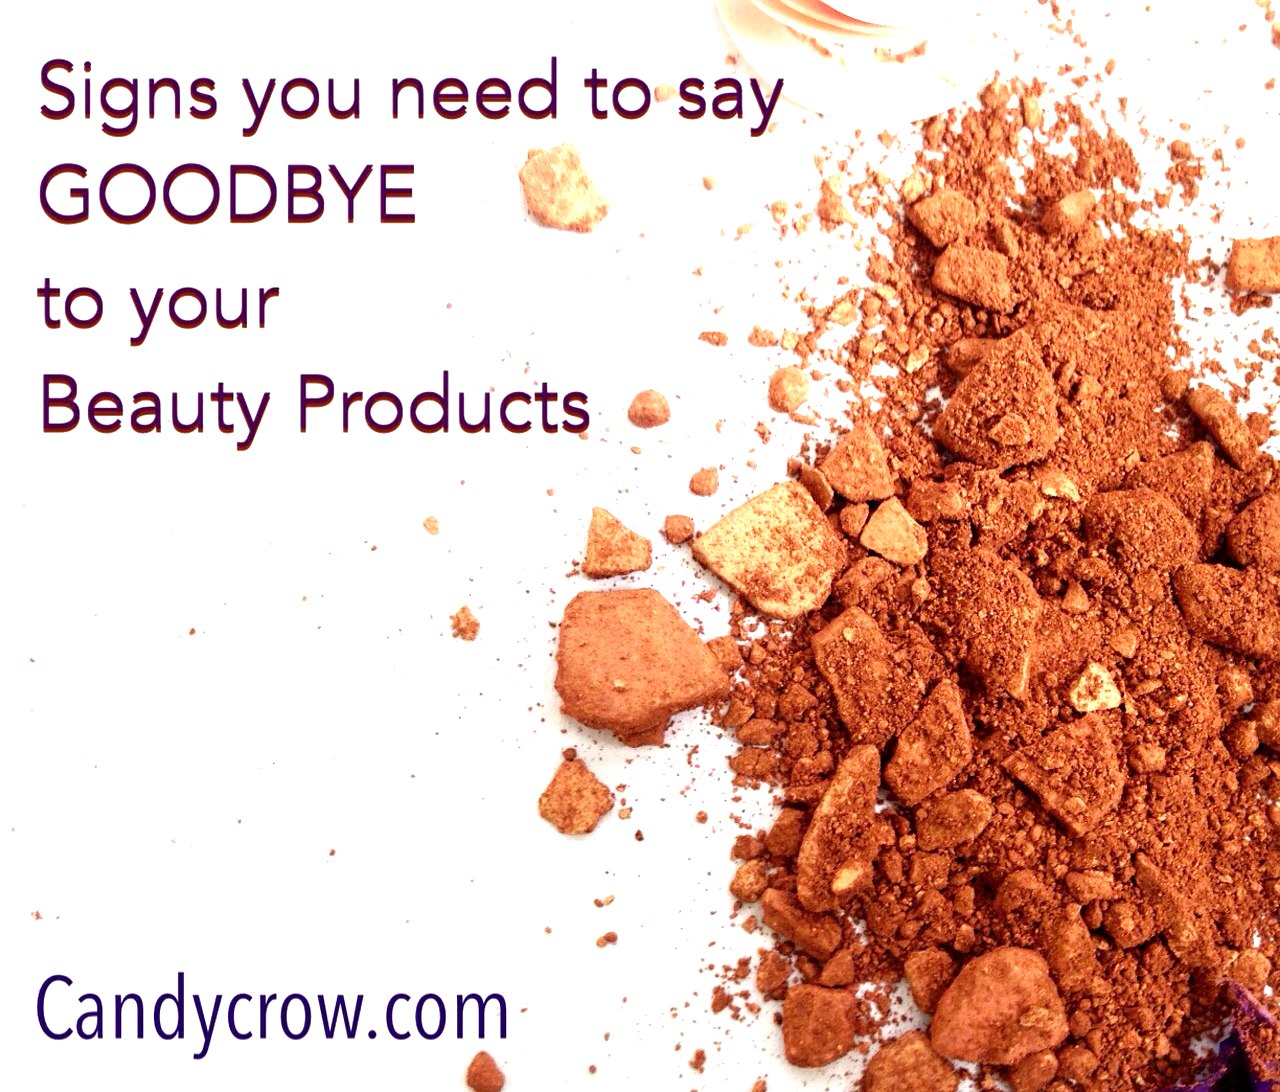 Signs you need to say Goodbye to your beauty products: